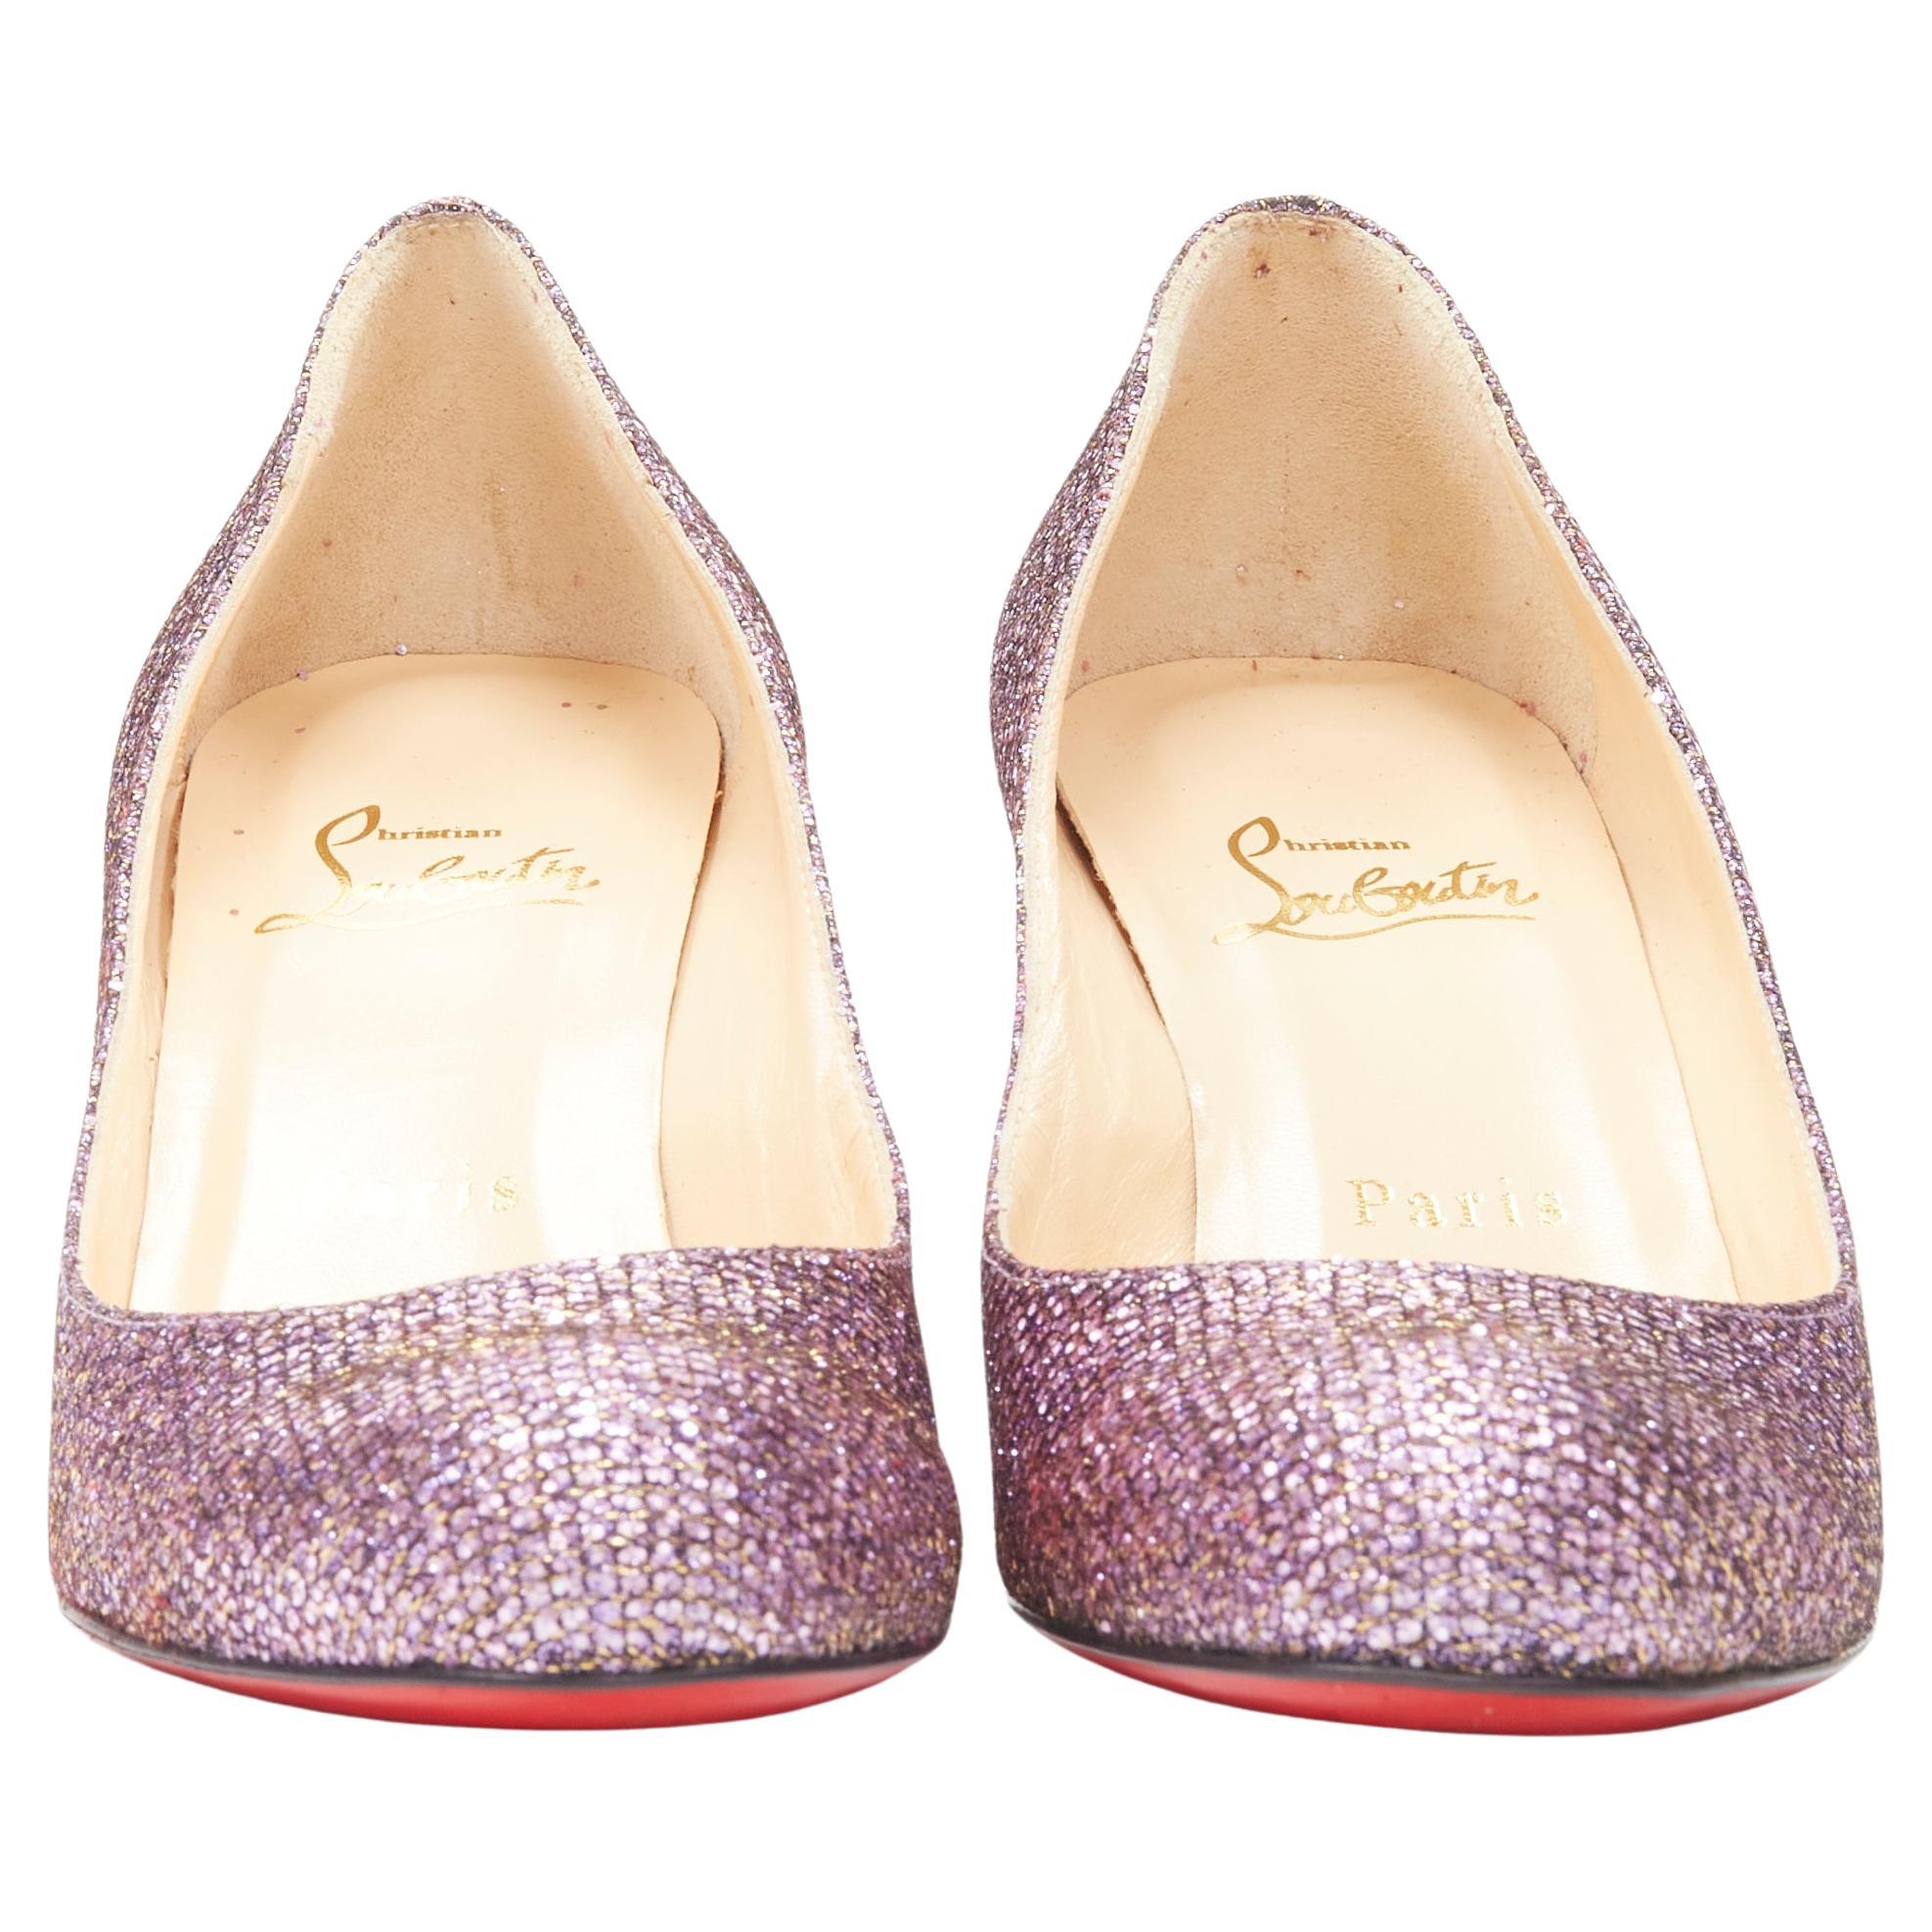 CHRISTIAN LOUOUTIN Fifi pink gold glitter round toe mid heel pump EU37.5 
Reference: MELK/A00192 
Brand: Christian Louboutin 
Model: Fifi 
Material: Leather 
Color: Pink 
Pattern: Solid 
Made in: Italy 

CONDITION: 
Condition: Excellent, this item